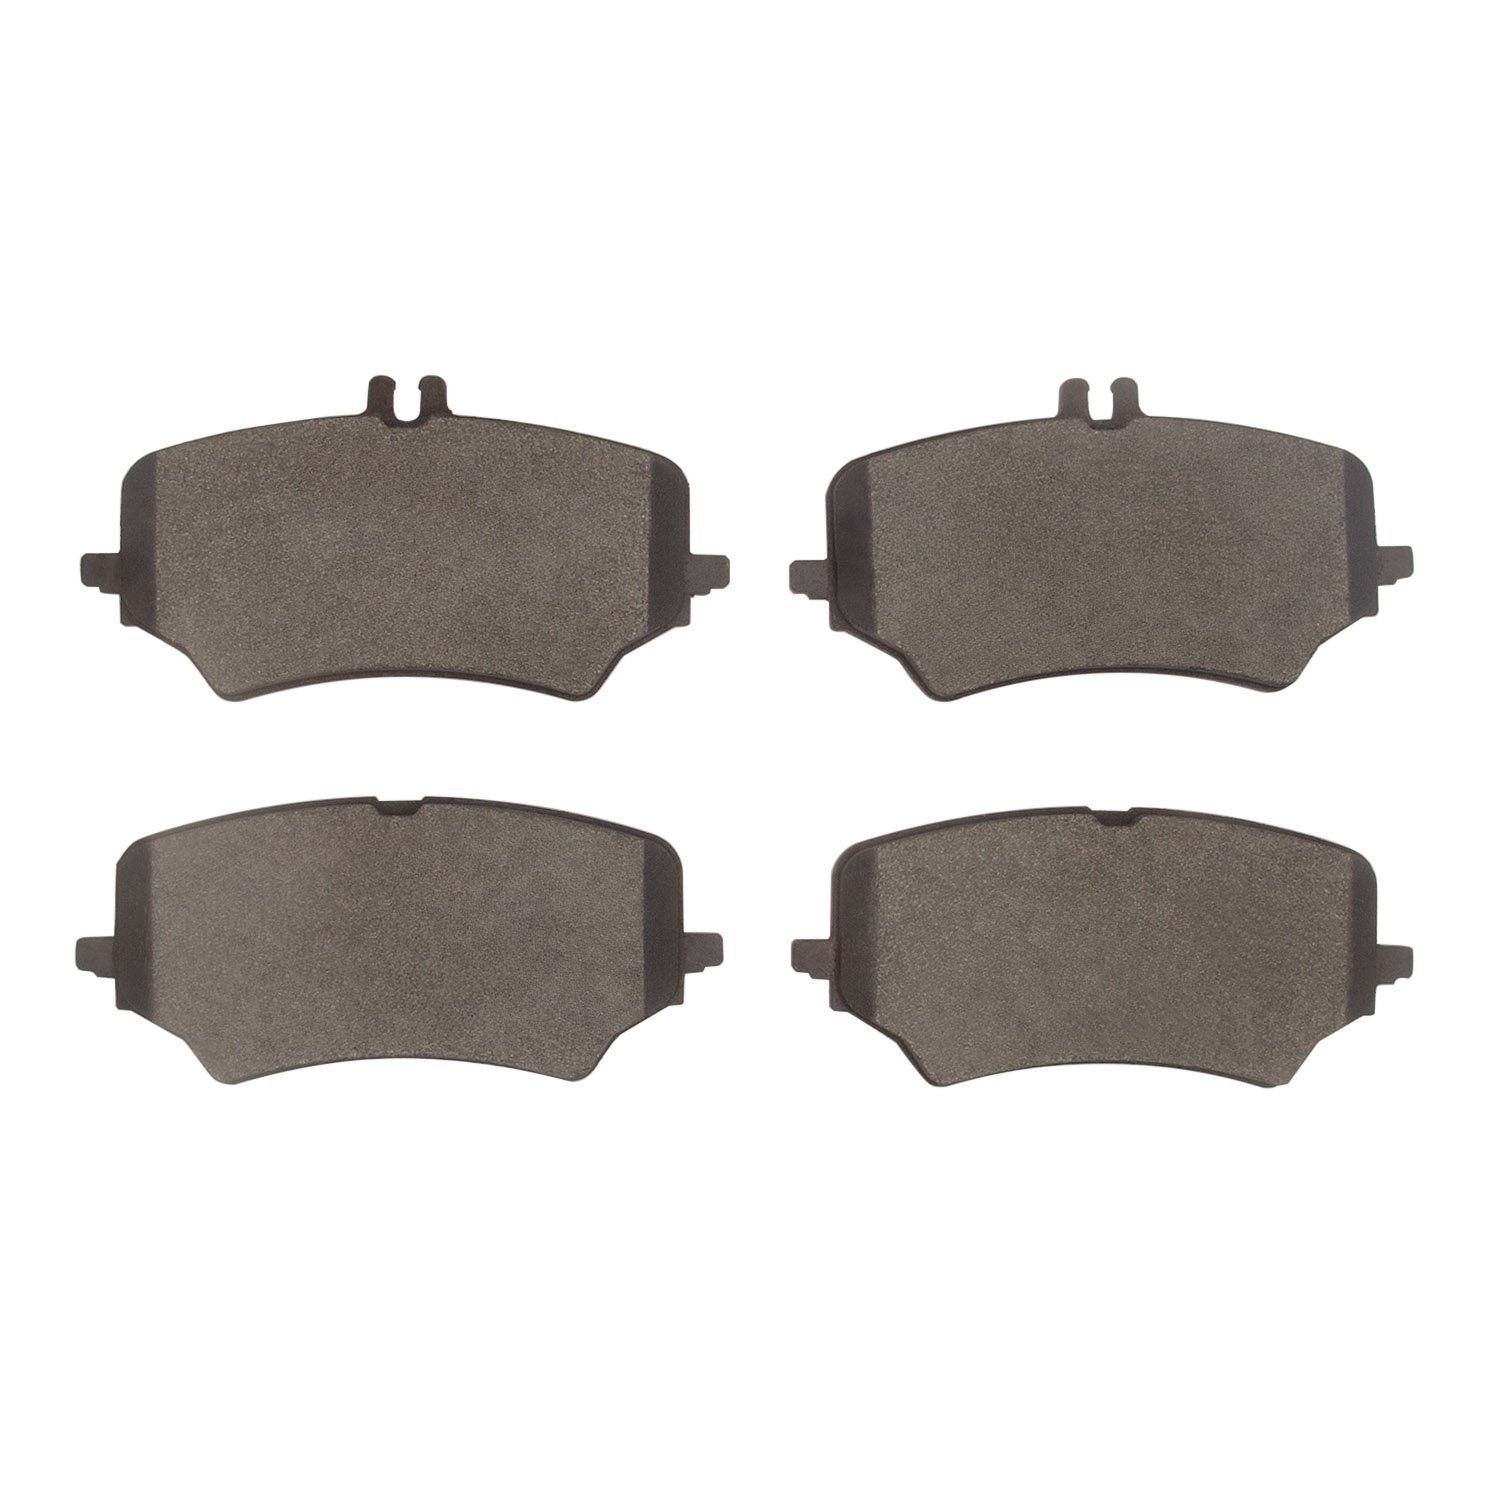 1600-2454-00 5000 Euro Ceramic Brake Pads, Fits Select Mercedes-Benz, Position: Rear